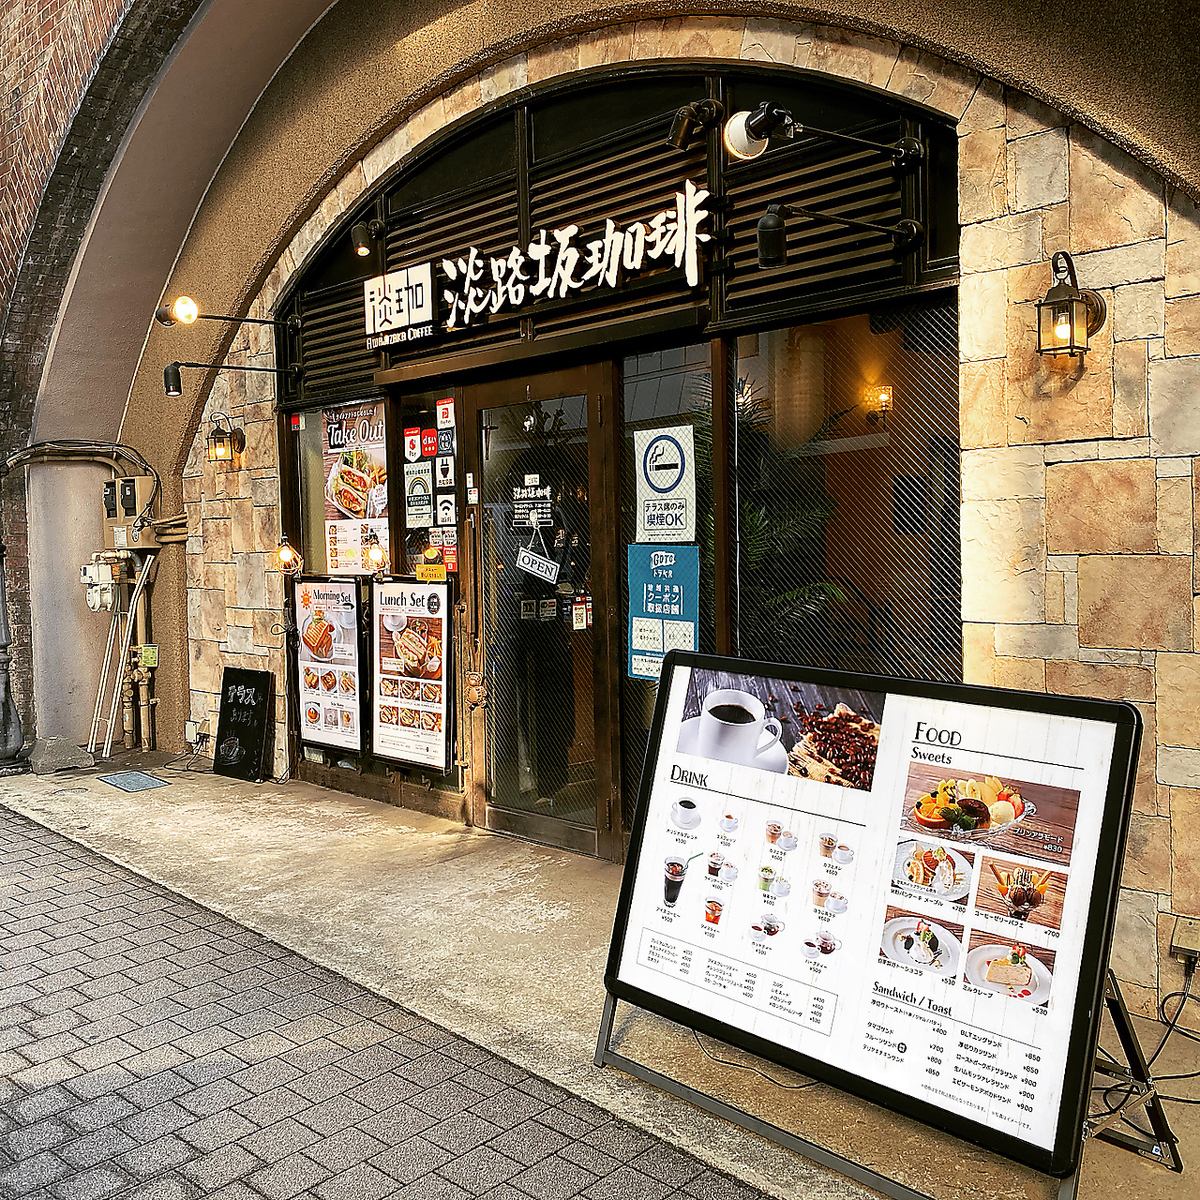 2 minutes walk from the station! Please feel free to visit us for a snack or a cafe.